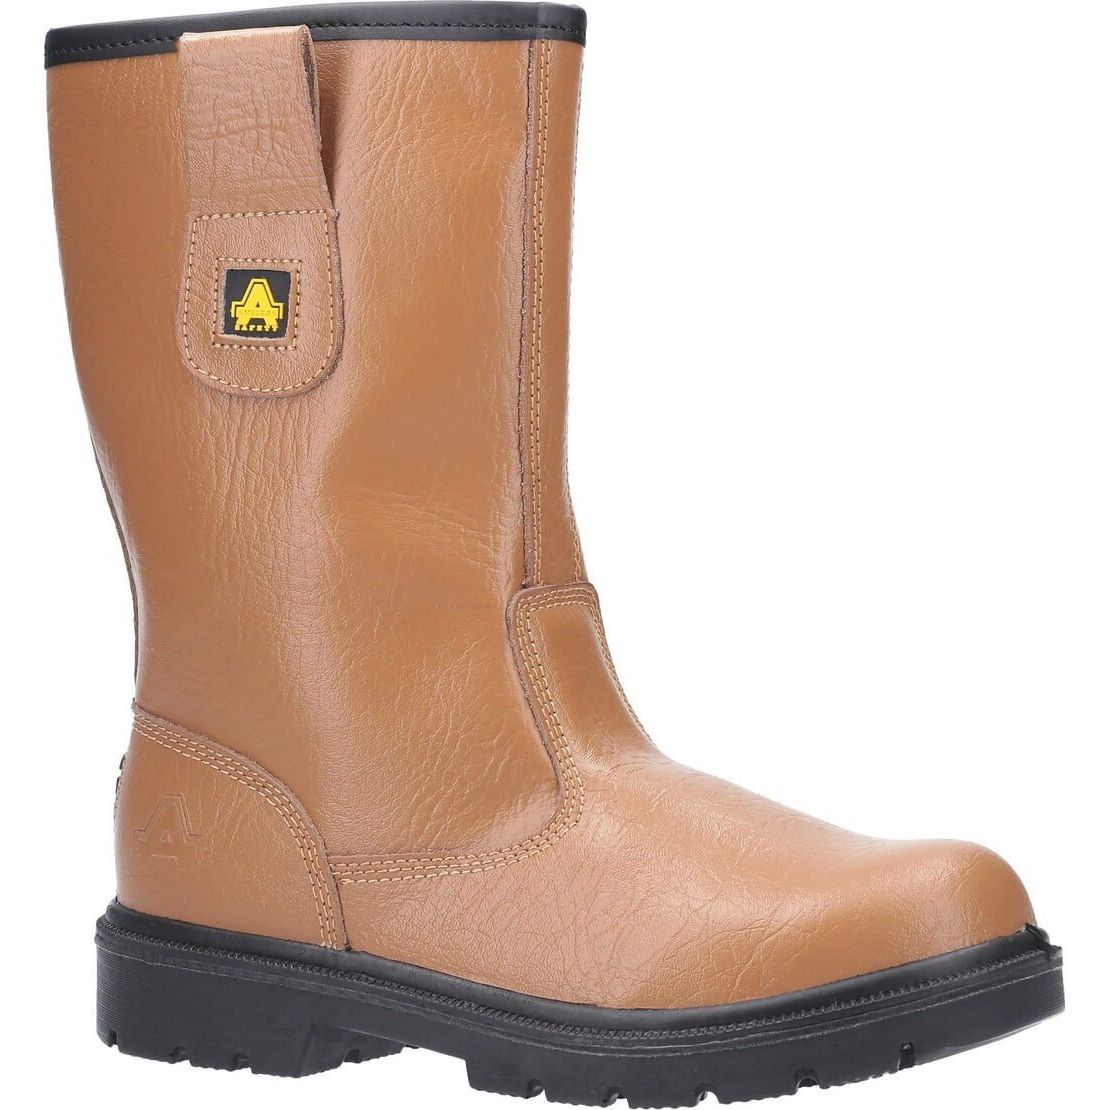 Amblers Fs124 Safety Rigger Boots Mens - workweargurus.com